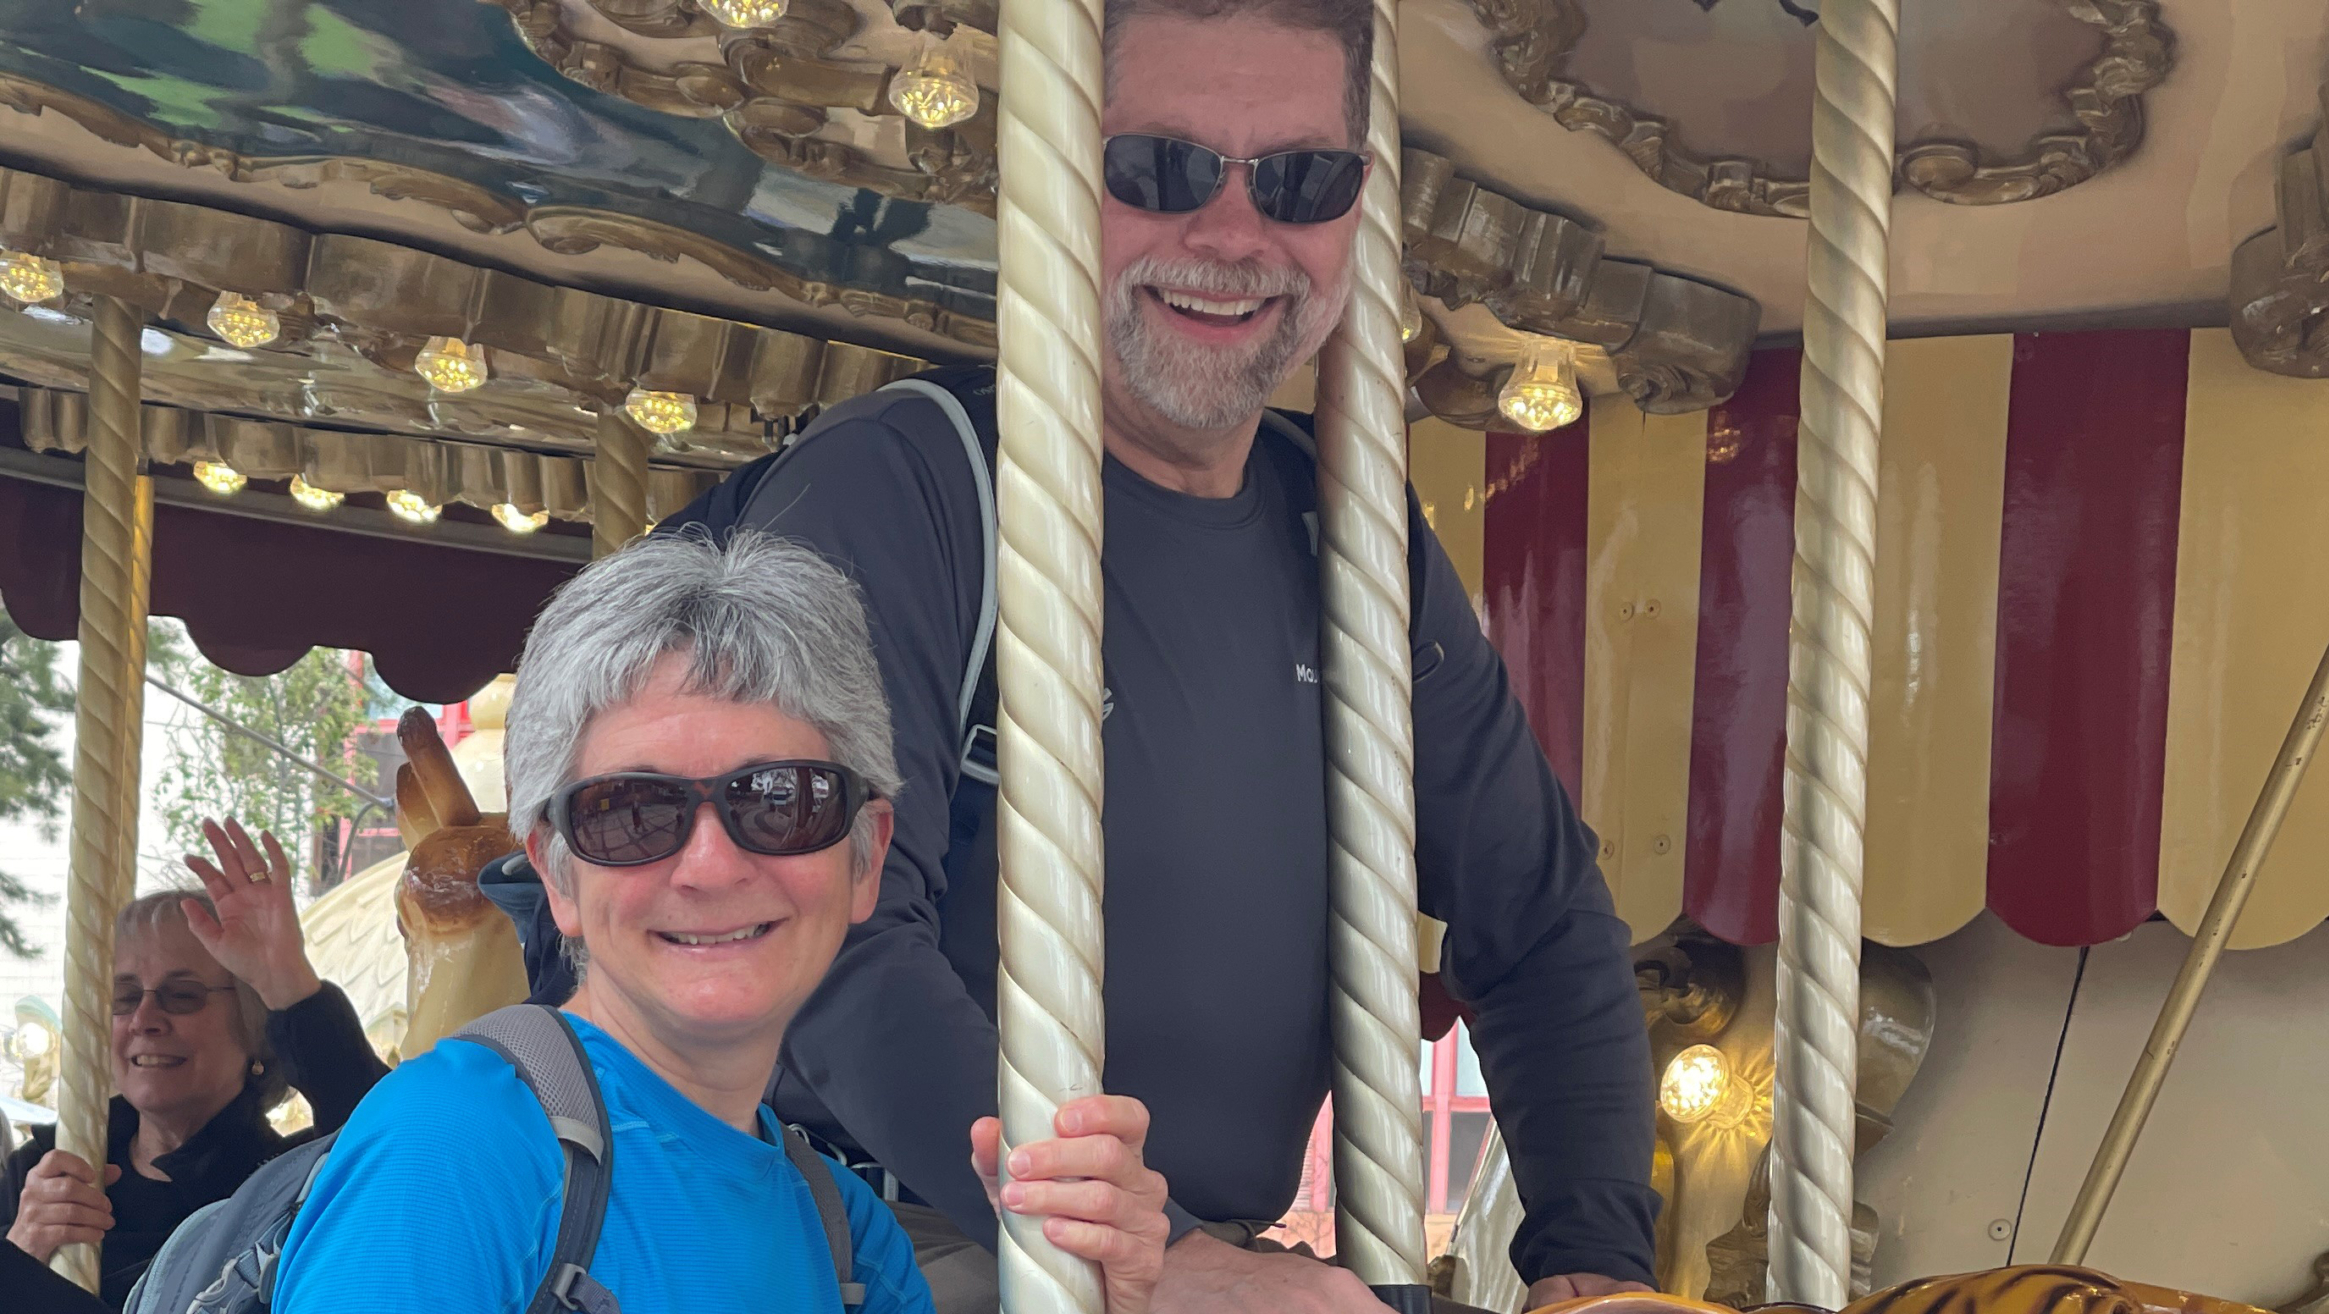 Carla Rossi and her husband on a carousel